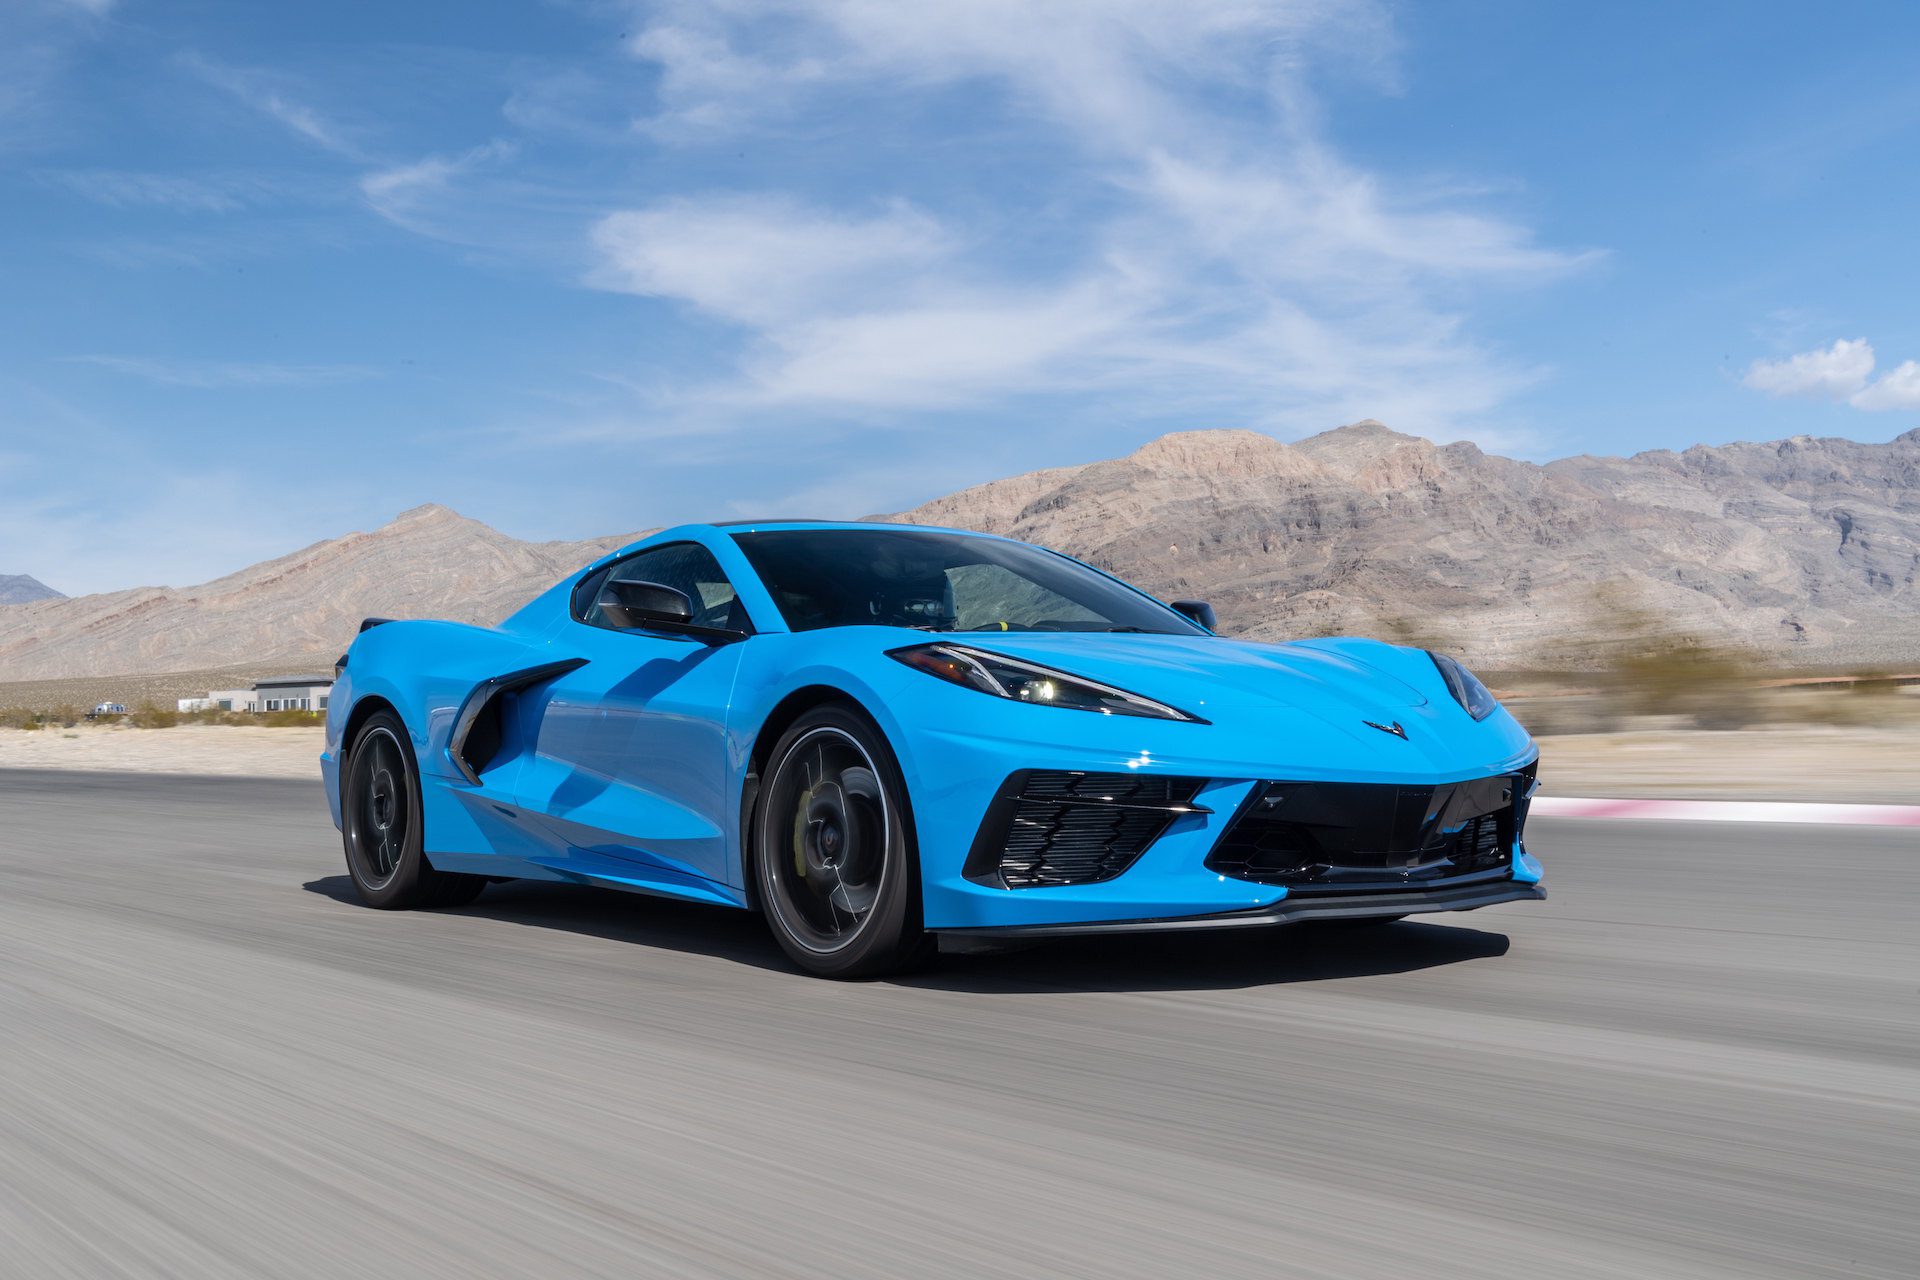 Front-angled view of a blue Chevrolet C8 Corvette driving along a highway